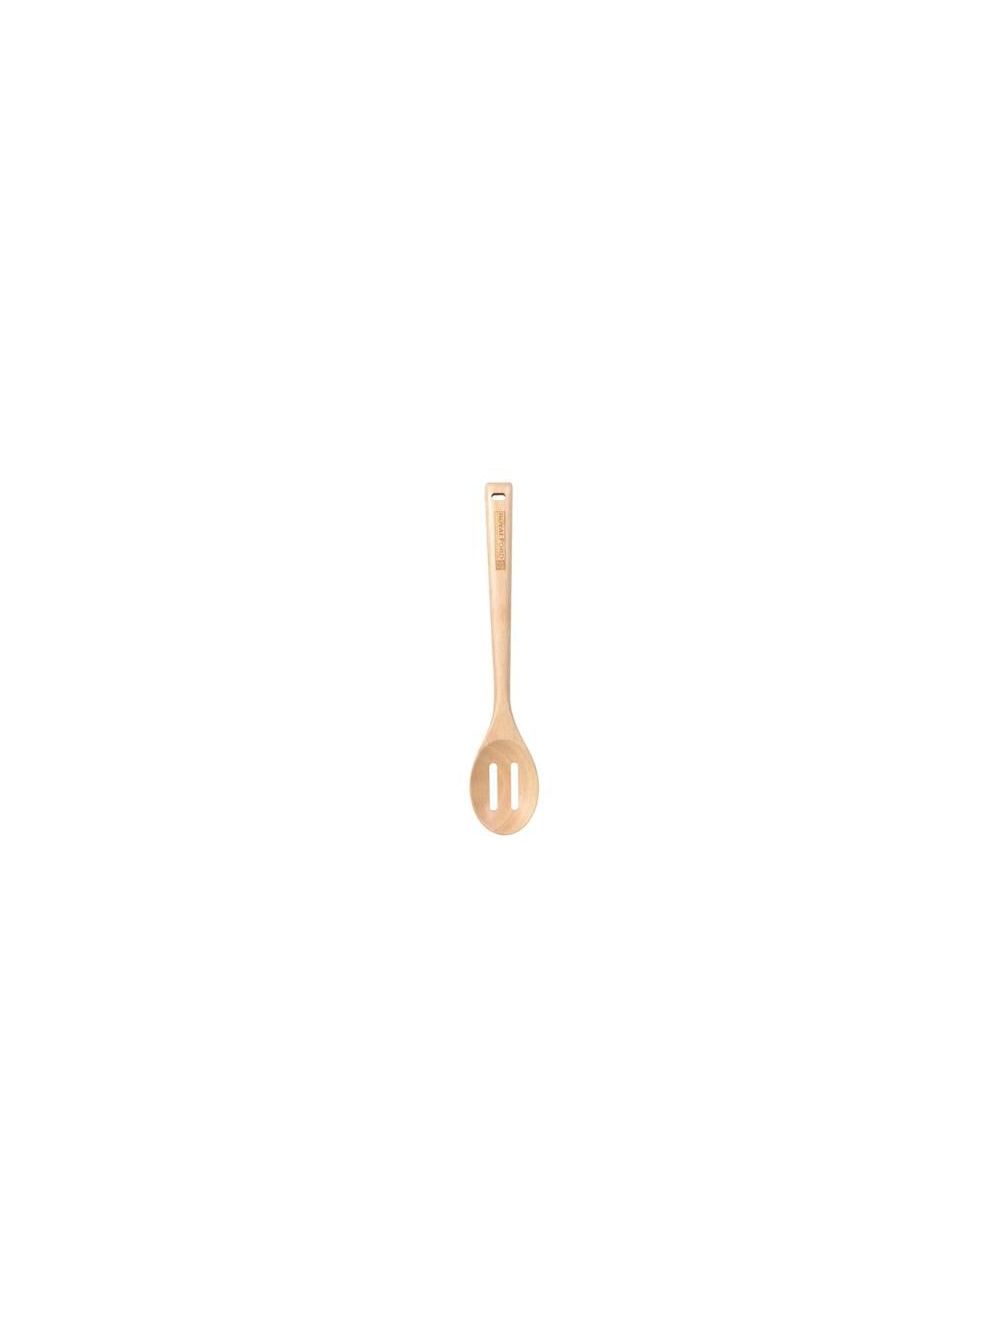 Royalford RF9791 Rubber Wood Slotted Spoon